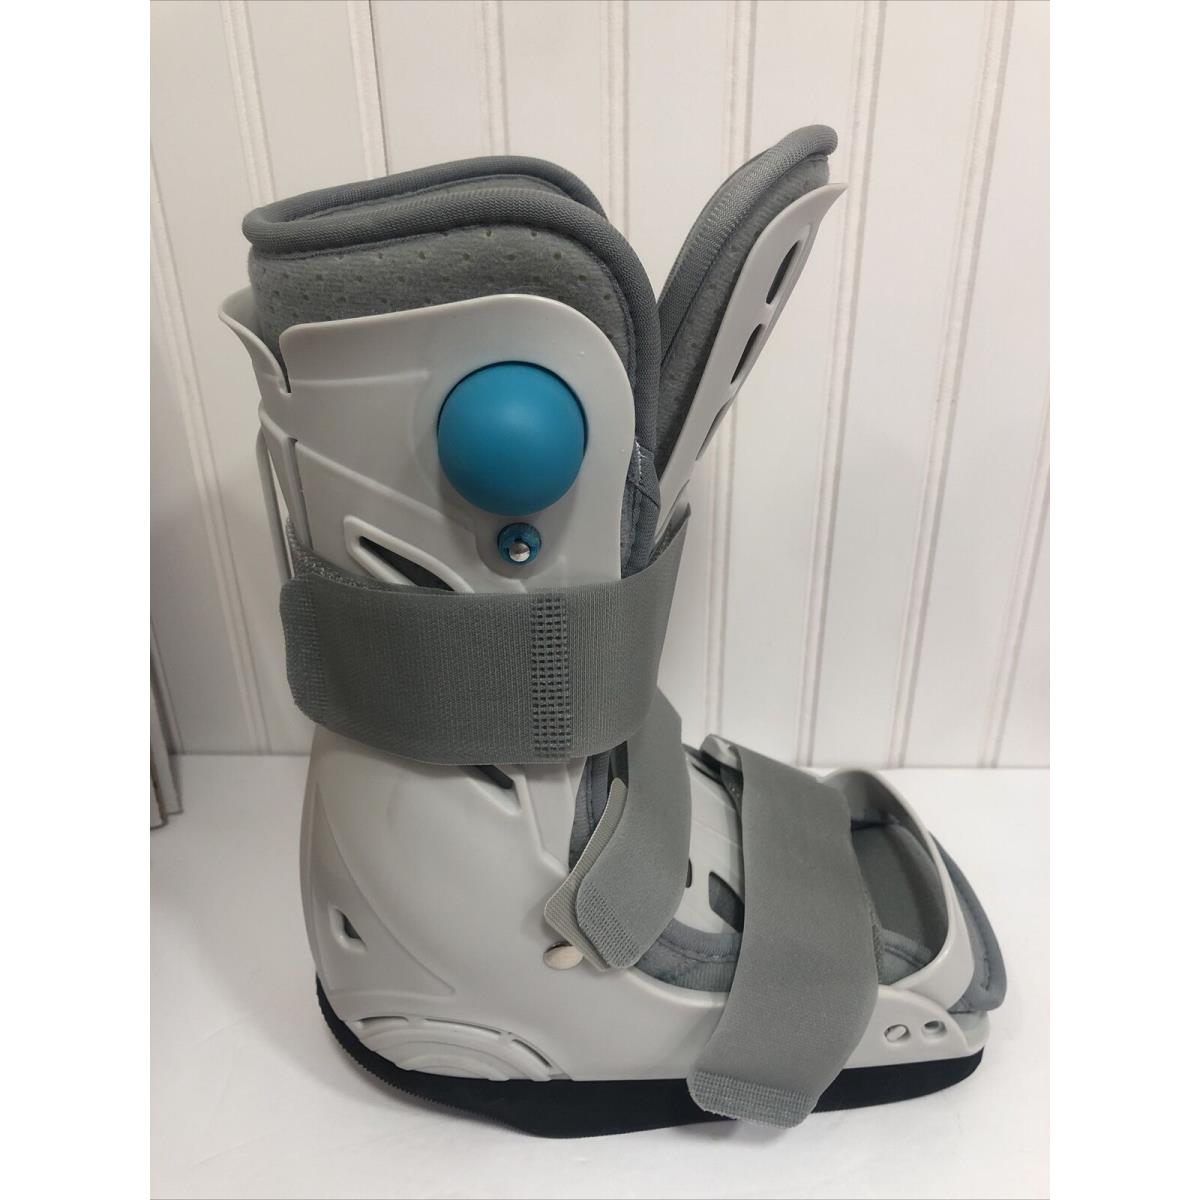 Rearfoot Aircast Walker Boot Fracture Boot Ankle Brace Size Small